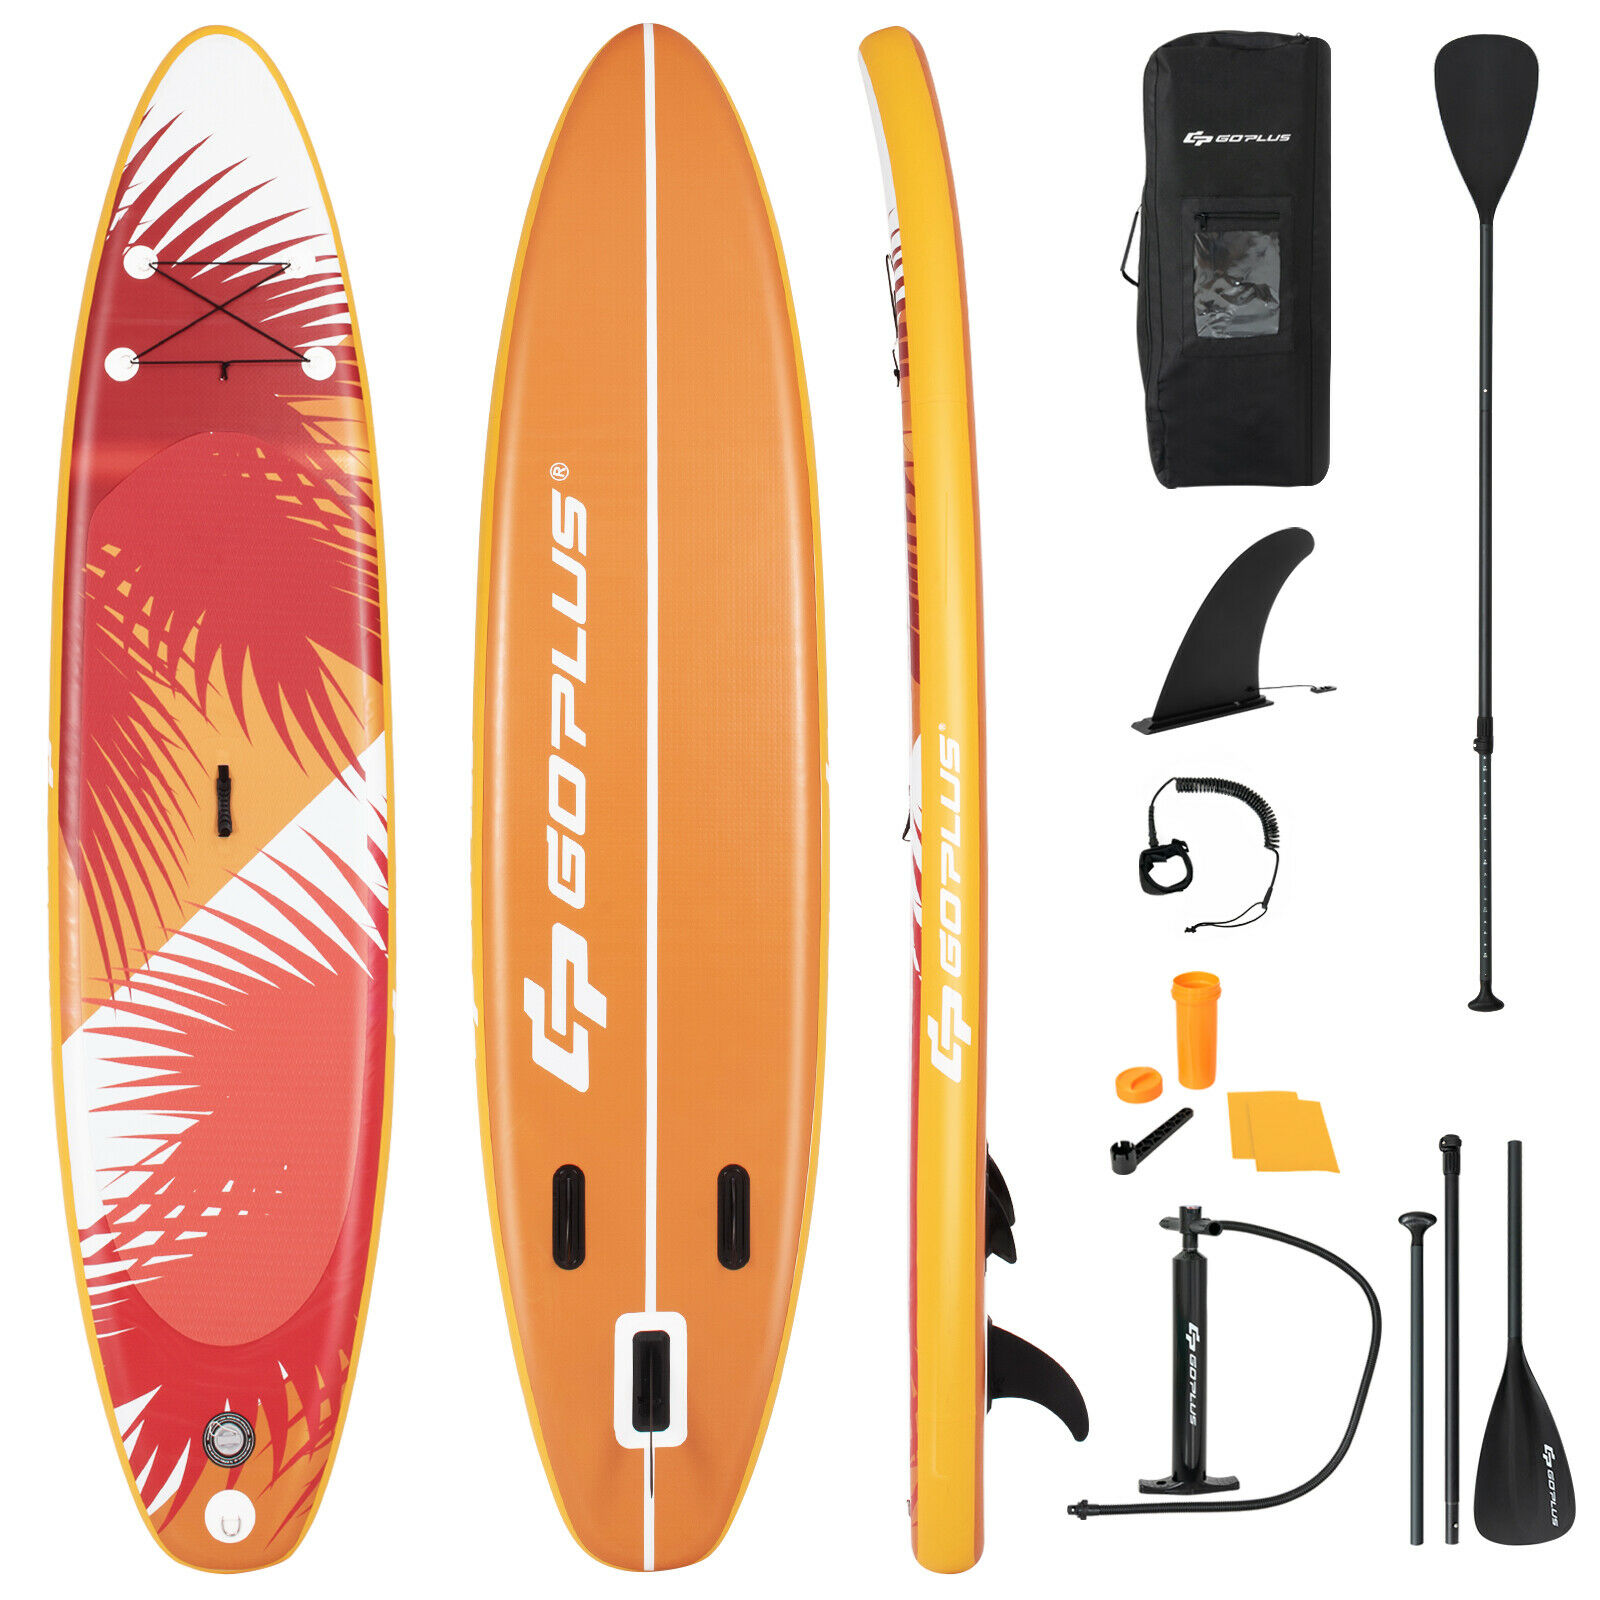 11FT Inflatable Stand Up Paddle Board Adjustable Non-Slip Deck